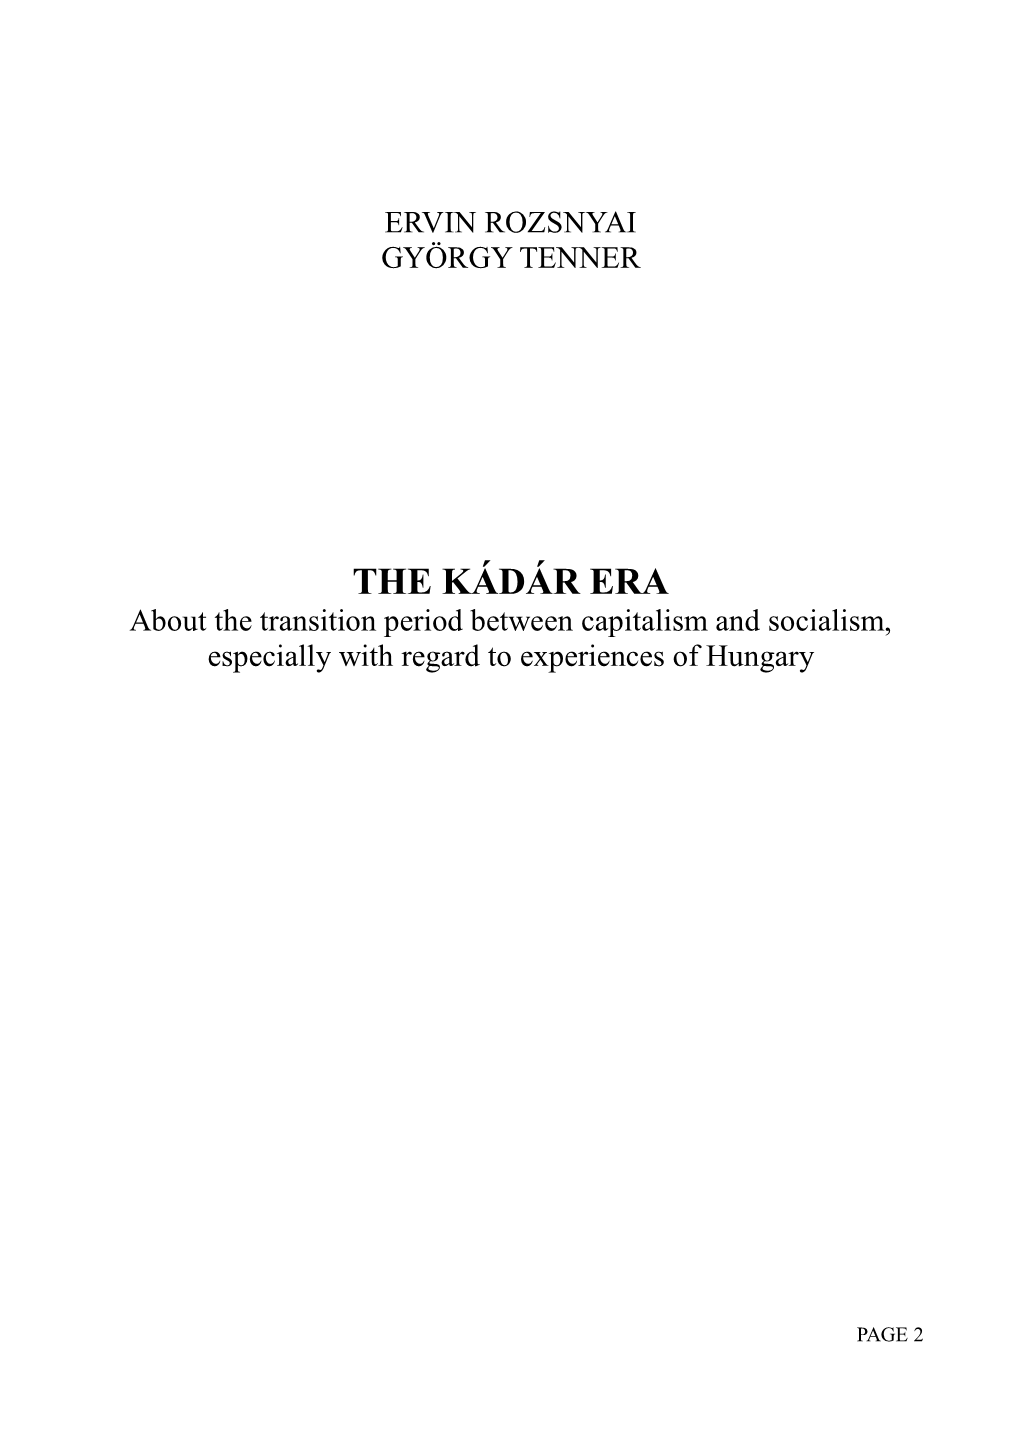 THE KÁDÁR ERA About the Transition Period Between Capitalism and Socialism, Especially with Regard to Experiences of Hungary